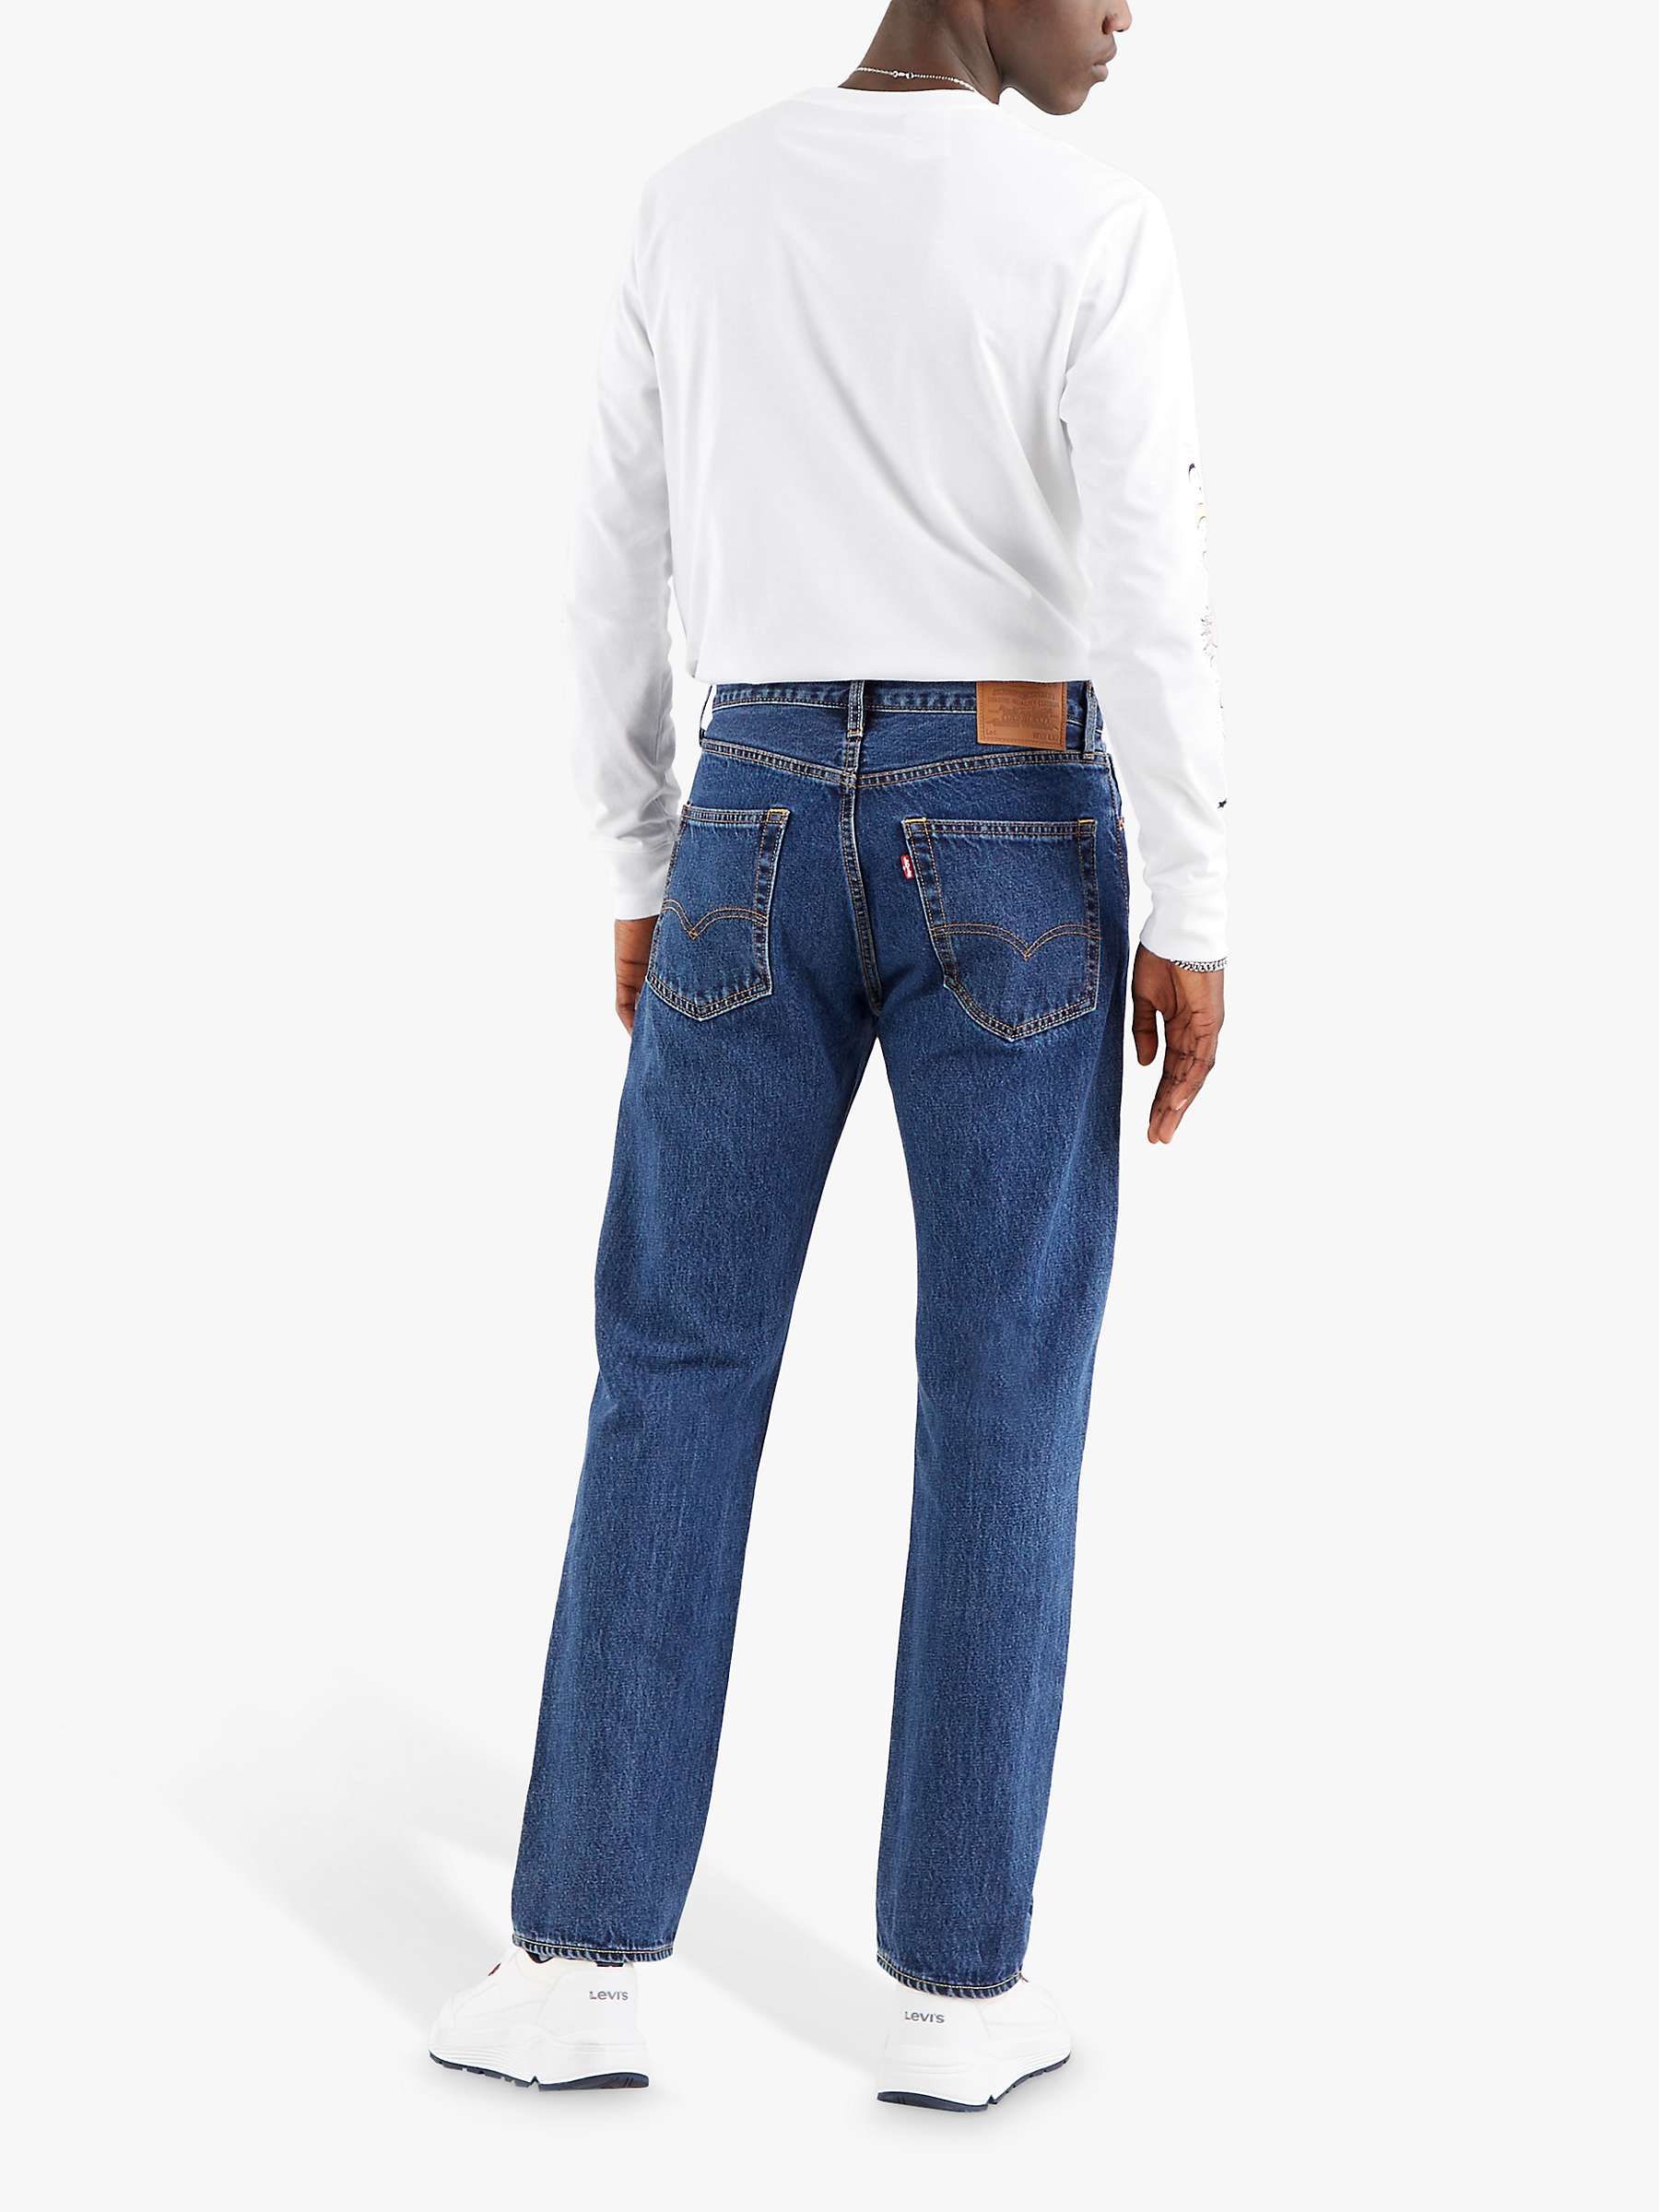 Buy Levi's 551 Straight Fit Jeans, Rubber Worm Online at johnlewis.com